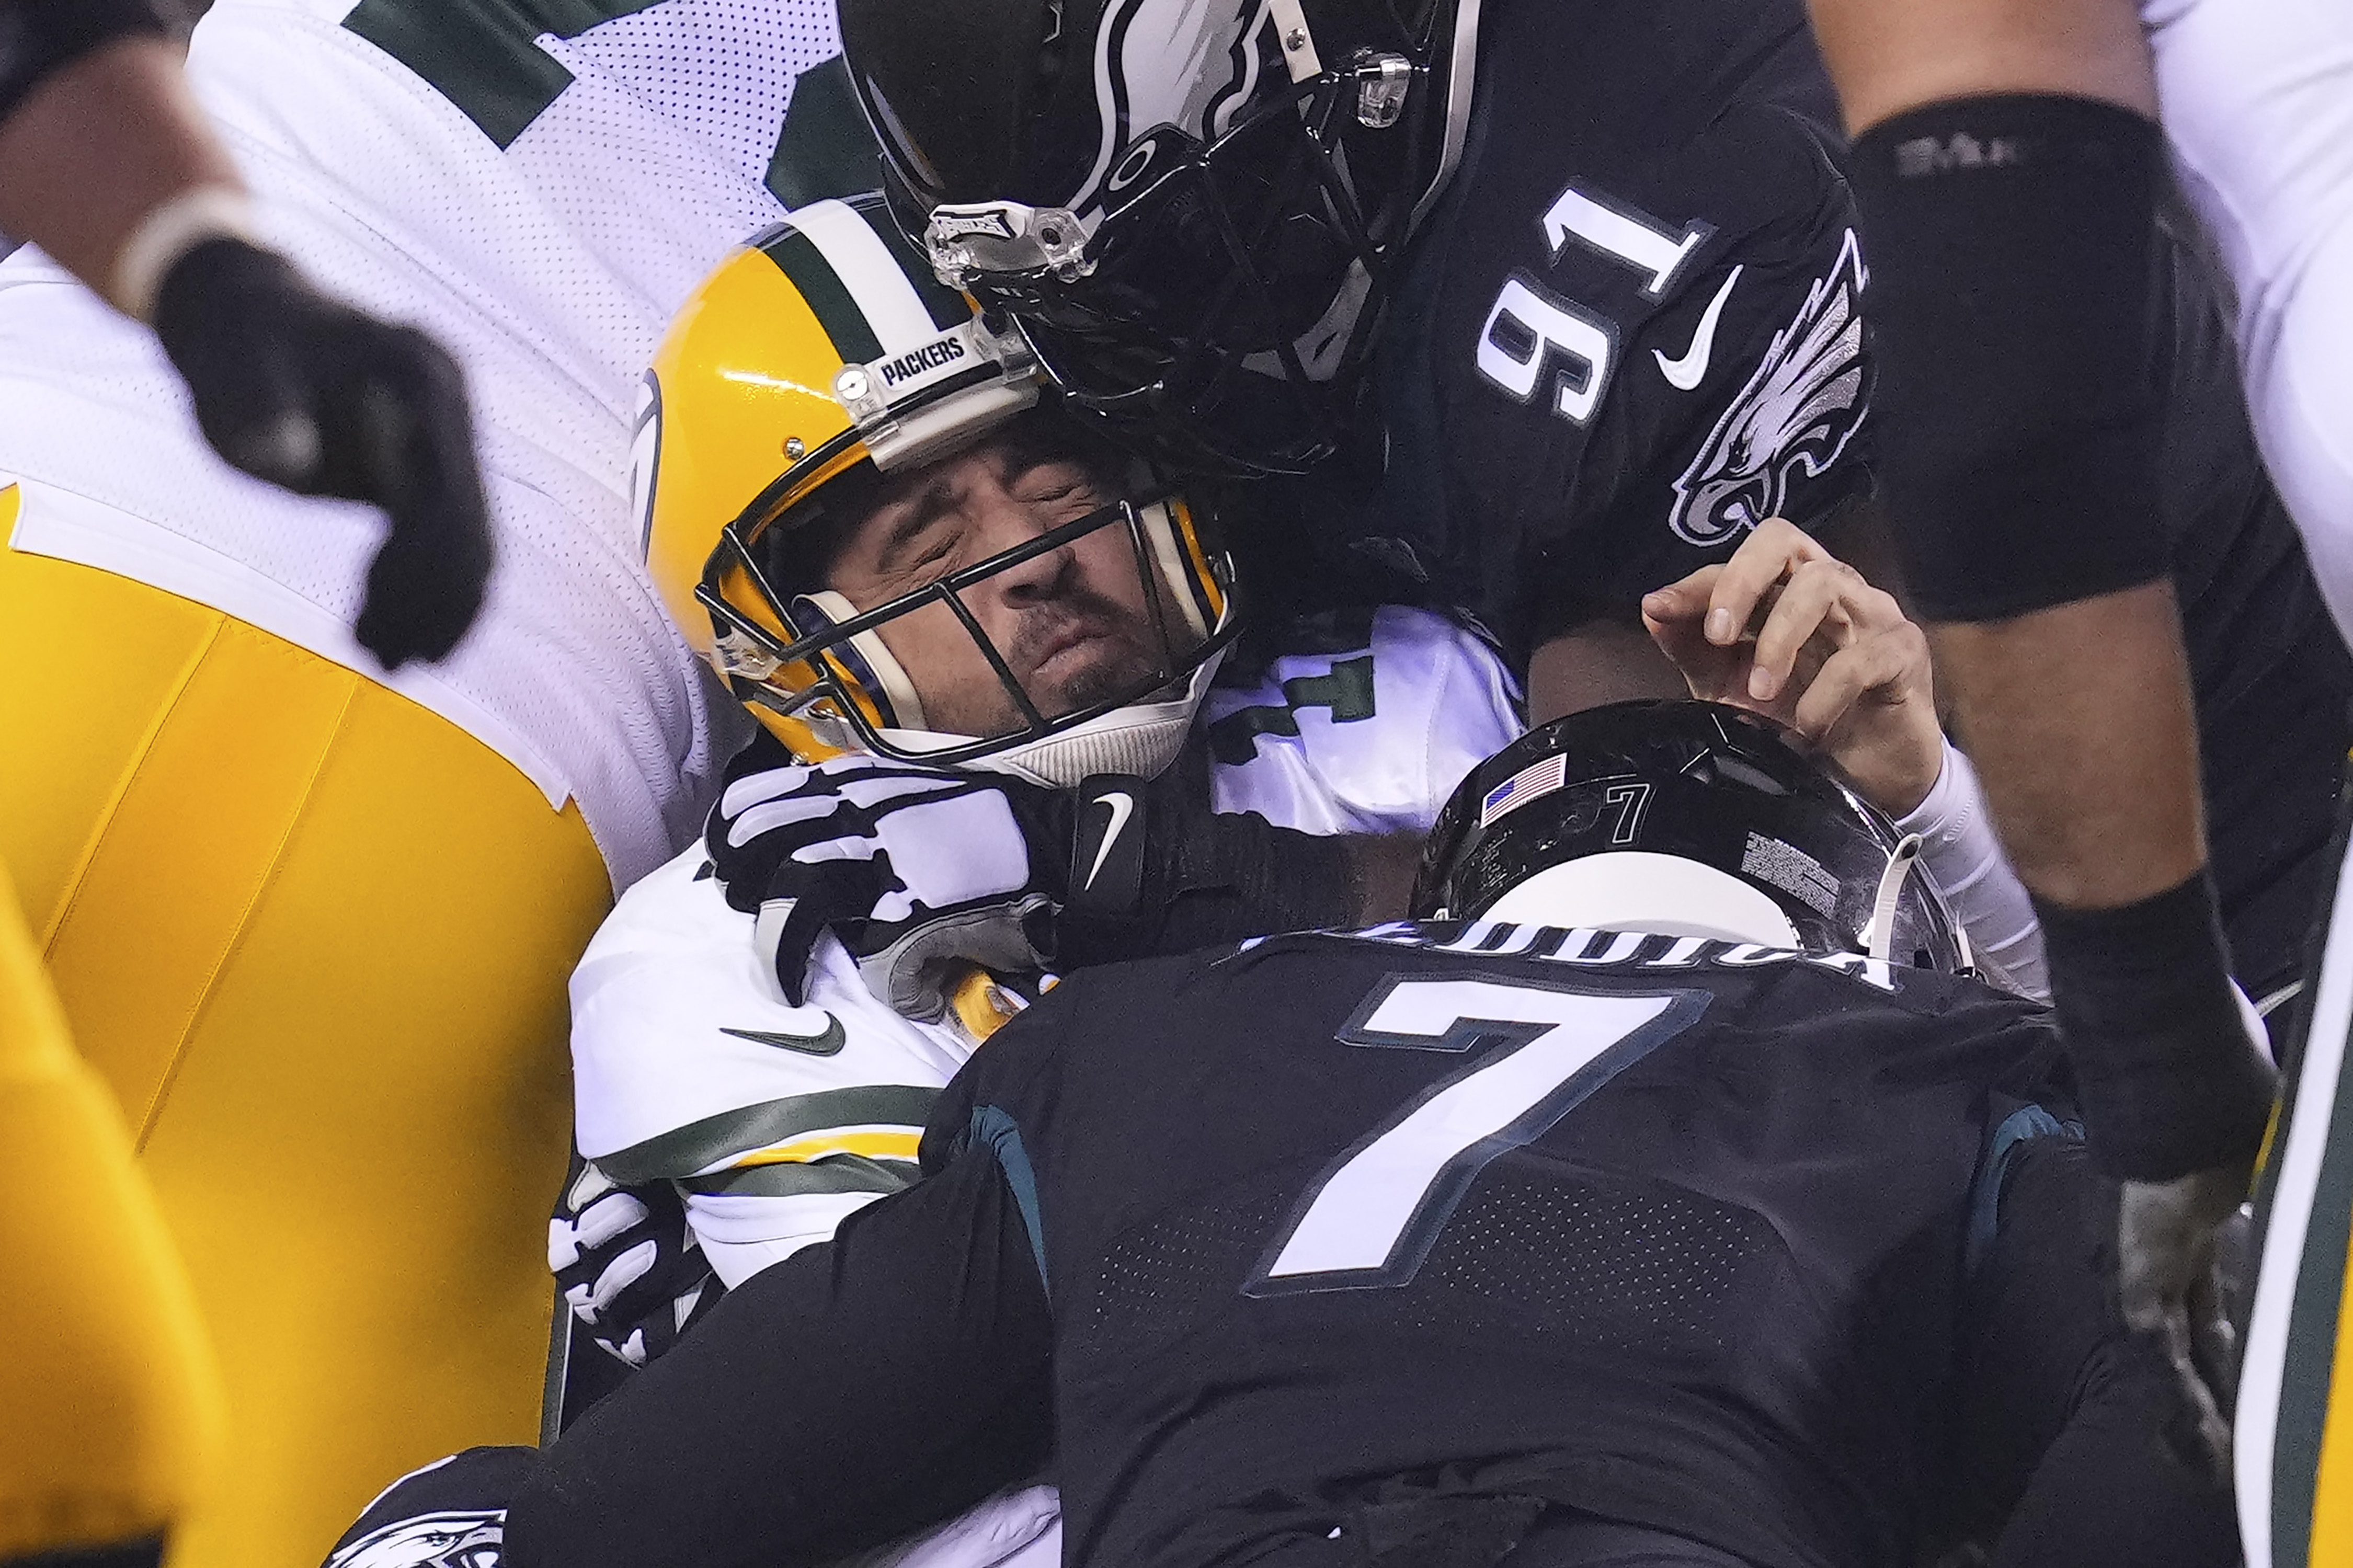 Aaron Rodgers #12 of the Green Bay Packers is sacked by Brandon Graham #55 of the Philadelphia Eagles during the third quarter at Lincoln Financial Field on November 27, 2022 in Philadelphia, Pennsylvania.